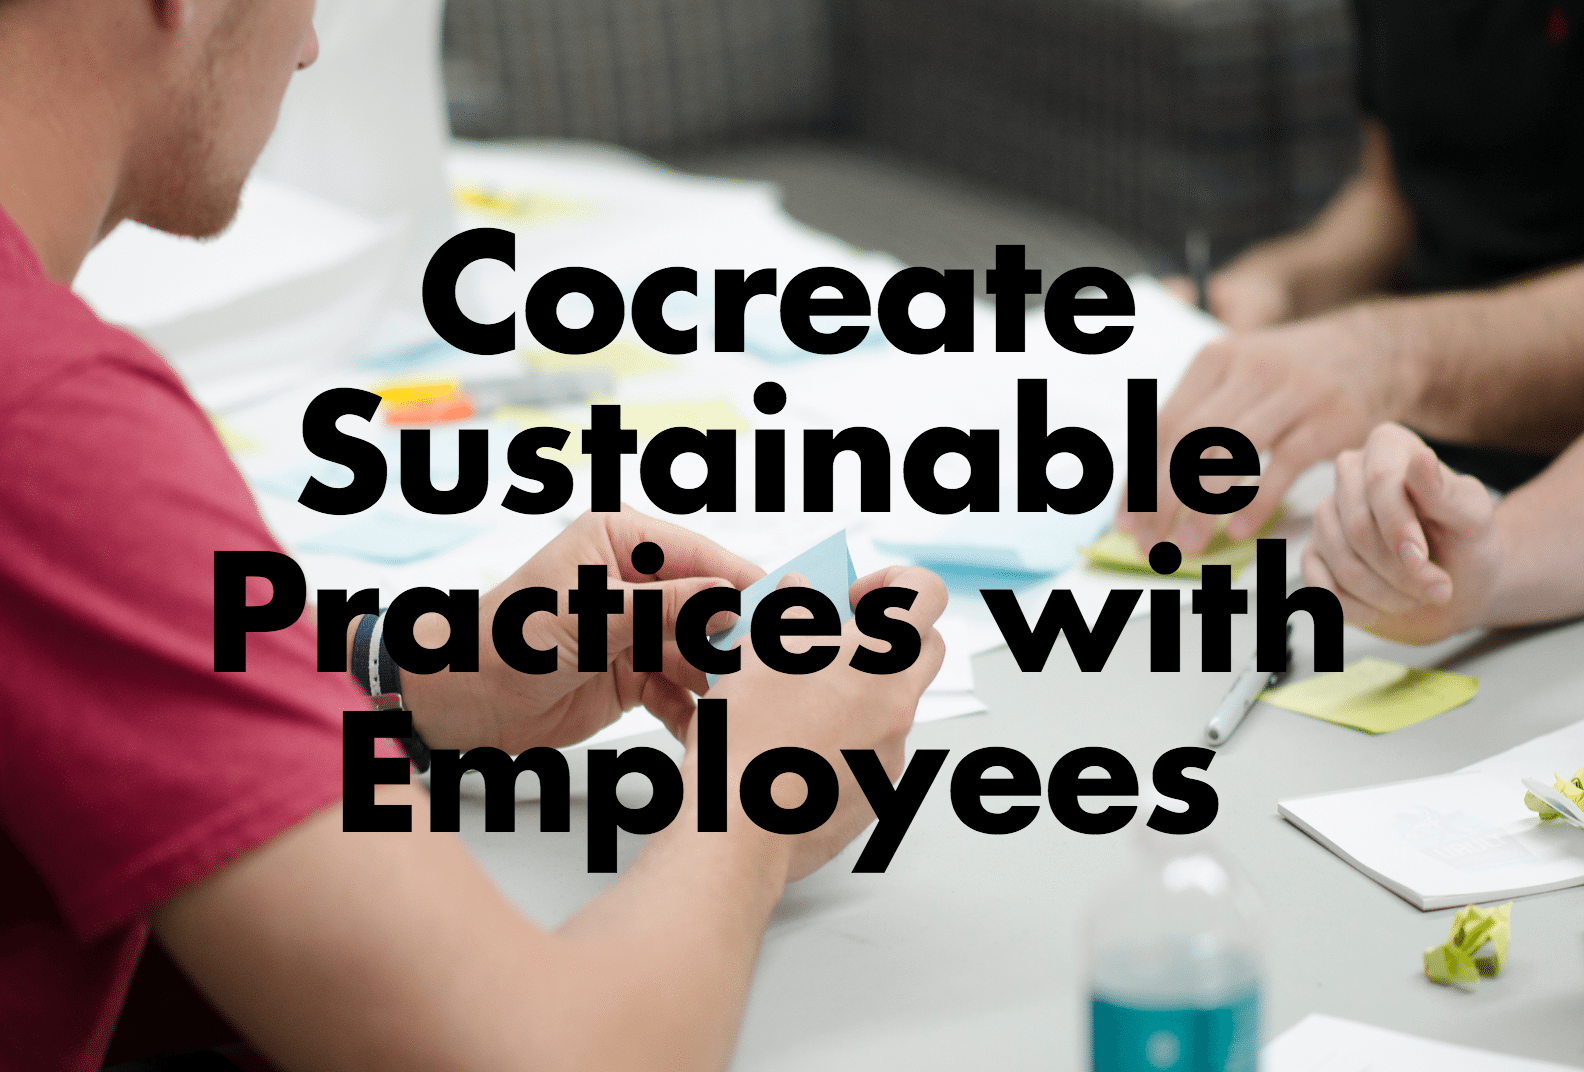 Cocoreate sustainable practices with employees